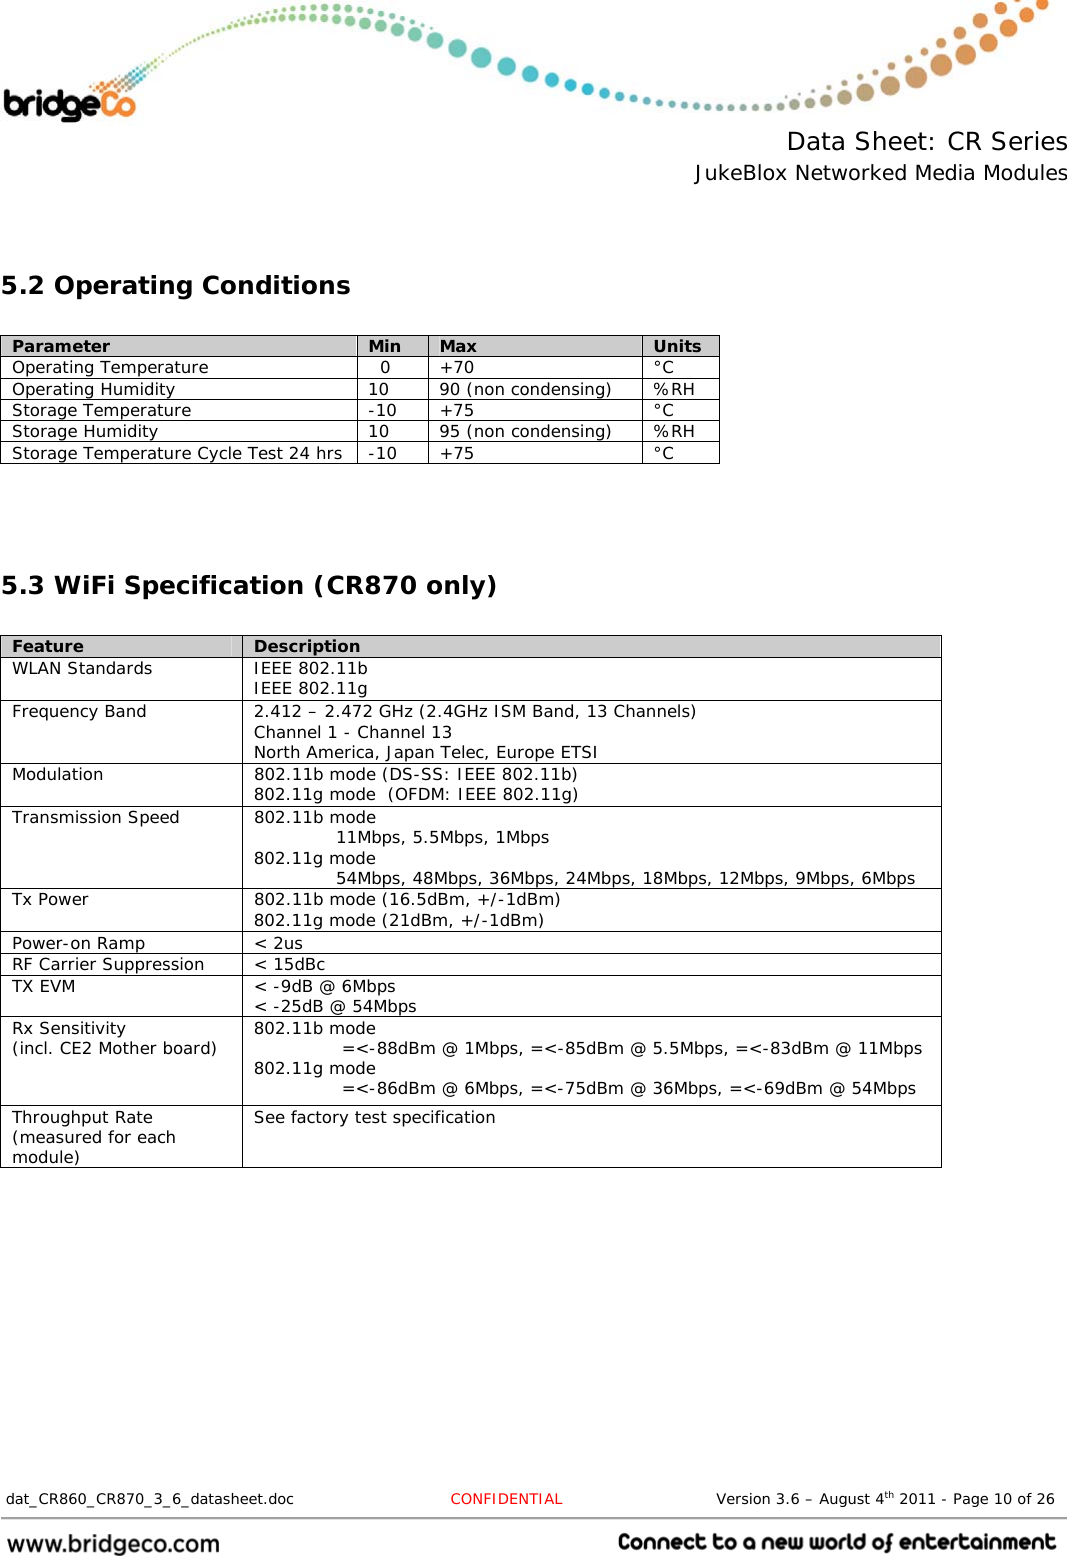  Data Sheet: CR Series JukeBlox Networked Media Modules  dat_CR860_CR870_3_6_datasheet.doc  CONFIDENTIAL                              Version 3.6 – August 4th 2011 - Page 10 of 26                                  5.2 Operating Conditions  Parameter  Min  Max  Units Operating Temperature    0  +70  °C Operating Humidity  10  90 (non condensing)  %RH Storage Temperature  -10  +75  °C Storage Humidity  10  95 (non condensing)  %RH Storage Temperature Cycle Test 24 hrs  -10  +75  °C   5.3 WiFi Specification (CR870 only)  Feature  Description WLAN Standards  IEEE 802.11b IEEE 802.11g Frequency Band  2.412 – 2.472 GHz (2.4GHz ISM Band, 13 Channels) Channel 1 - Channel 13 North America, Japan Telec, Europe ETSI Modulation  802.11b mode (DS-SS: IEEE 802.11b) 802.11g mode  (OFDM: IEEE 802.11g) Transmission Speed  802.11b mode               11Mbps, 5.5Mbps, 1Mbps 802.11g mode               54Mbps, 48Mbps, 36Mbps, 24Mbps, 18Mbps, 12Mbps, 9Mbps, 6Mbps Tx Power  802.11b mode (16.5dBm, +/-1dBm) 802.11g mode (21dBm, +/-1dBm) Power-on Ramp  &lt; 2us RF Carrier Suppression  &lt; 15dBc TX EVM  &lt; -9dB @ 6Mbps &lt; -25dB @ 54Mbps Rx Sensitivity  (incl. CE2 Mother board)  802.11b mode                =&lt;-88dBm @ 1Mbps, =&lt;-85dBm @ 5.5Mbps, =&lt;-83dBm @ 11Mbps 802.11g mode                =&lt;-86dBm @ 6Mbps, =&lt;-75dBm @ 36Mbps, =&lt;-69dBm @ 54Mbps Throughput Rate (measured for each module) See factory test specification  